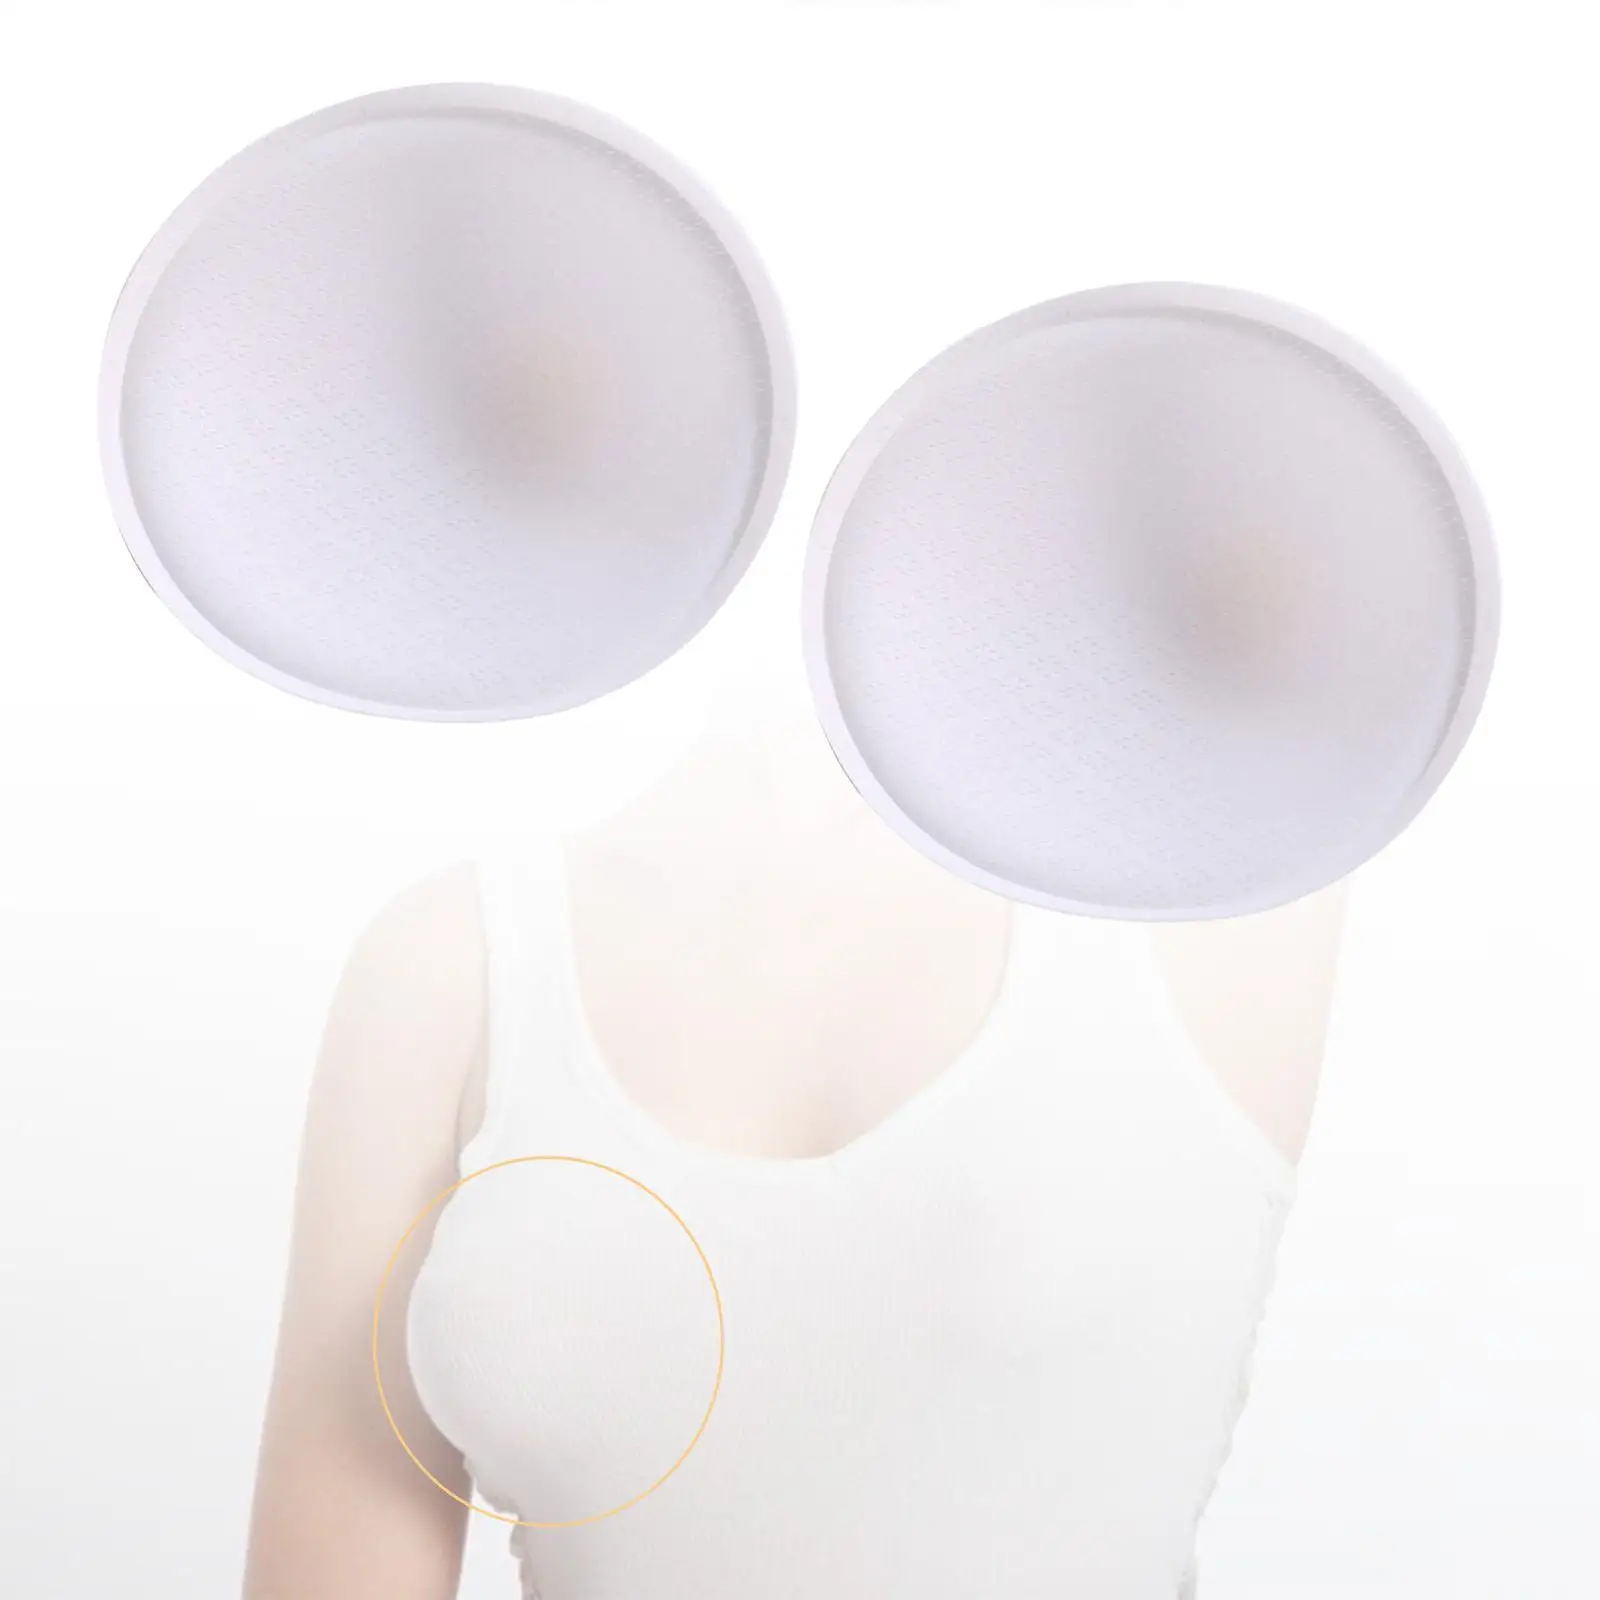 2Pcs Women Bra Pads Inserts, Sports Cups Bra Insert Padding Refreshing Lightweight Comfy for Evening Gowns Intimates Accessories